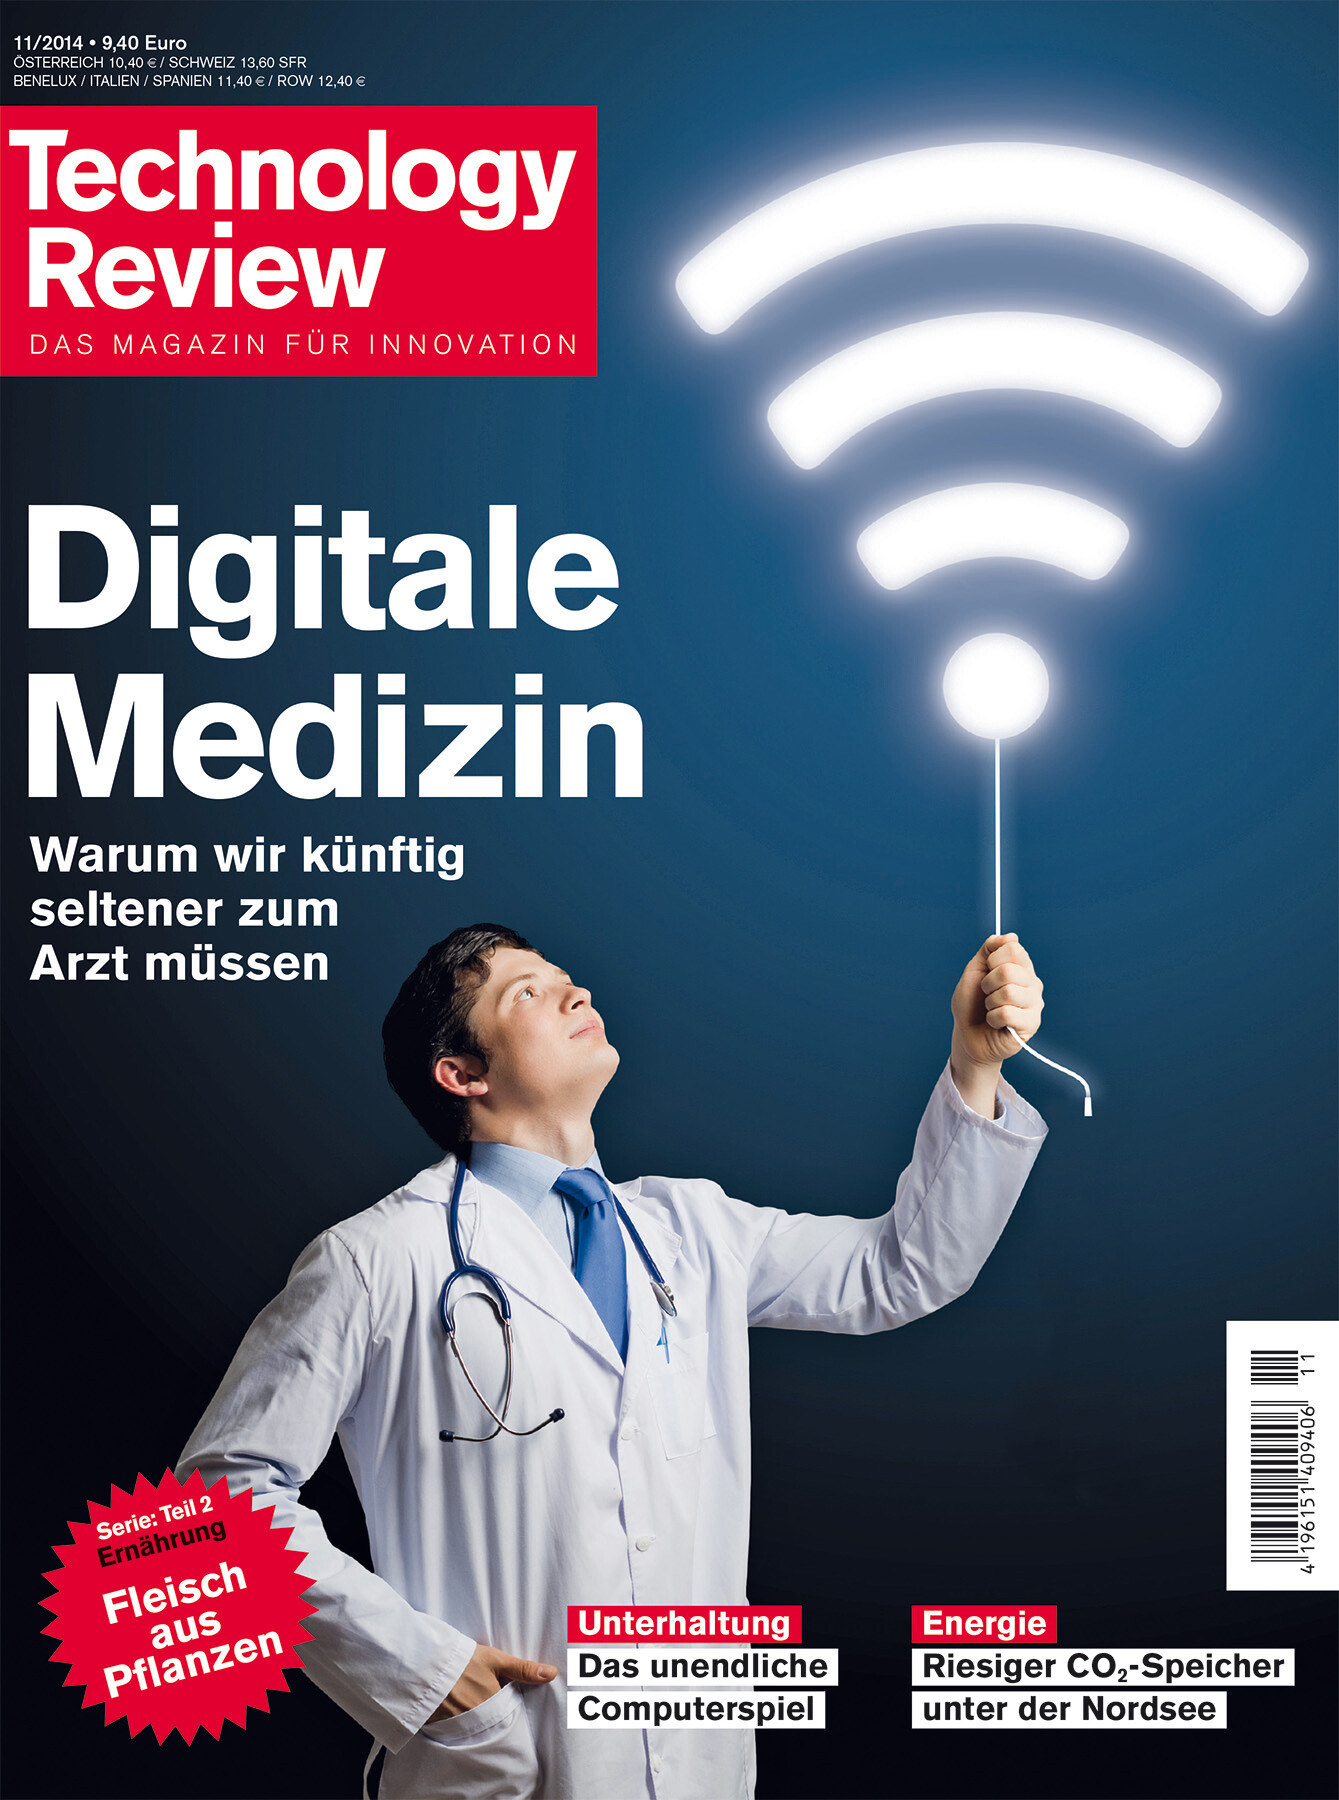 Technology Review 11/2014